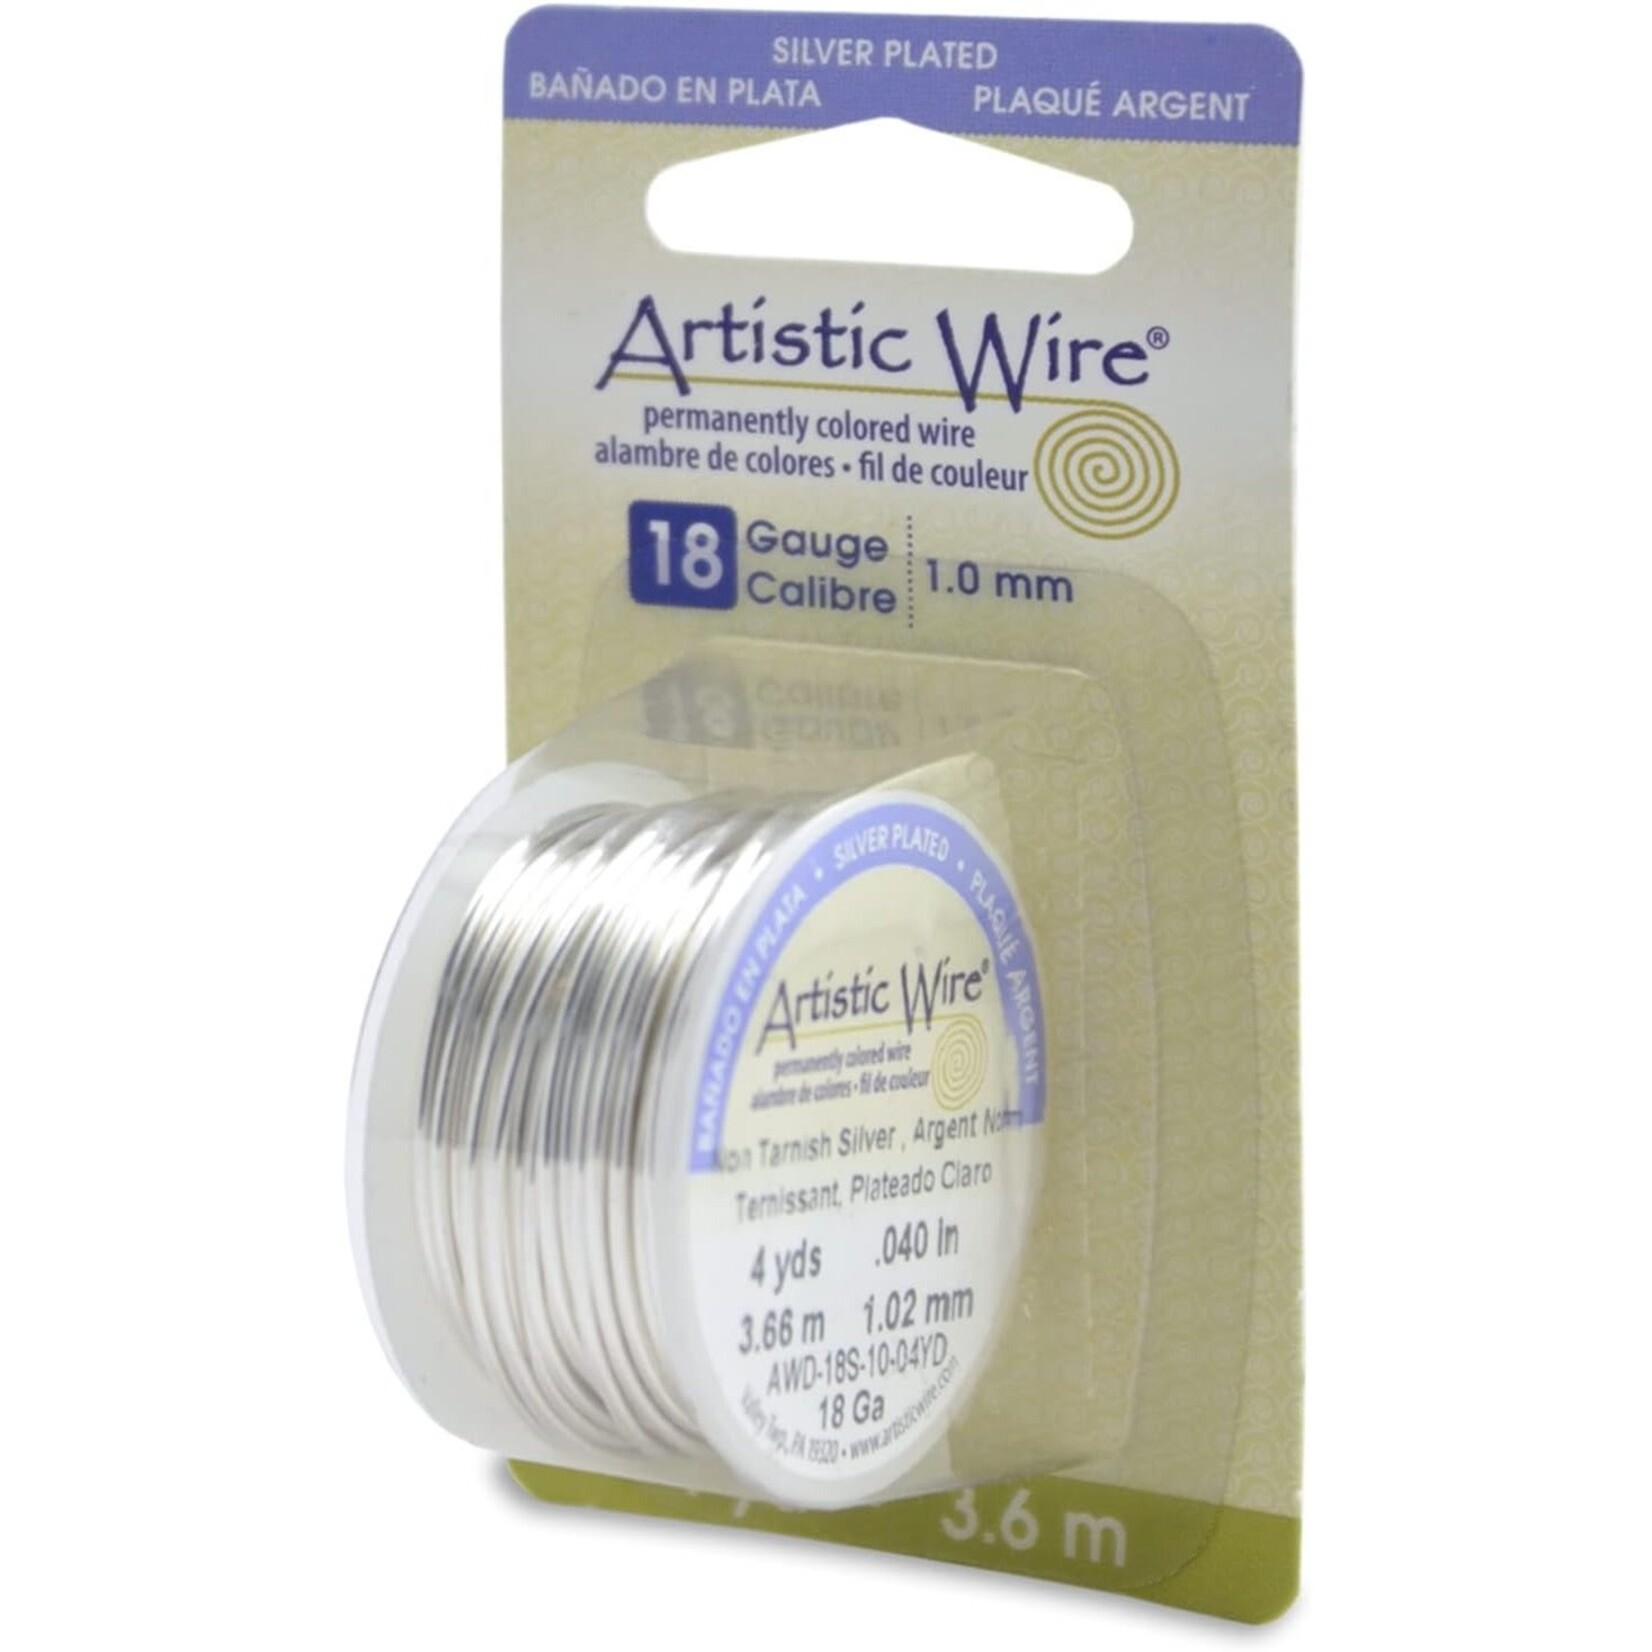 Artistic Wire Artistic Wire Tarnish Resistant Silver, 18 Gauge, 4 Yard Spool